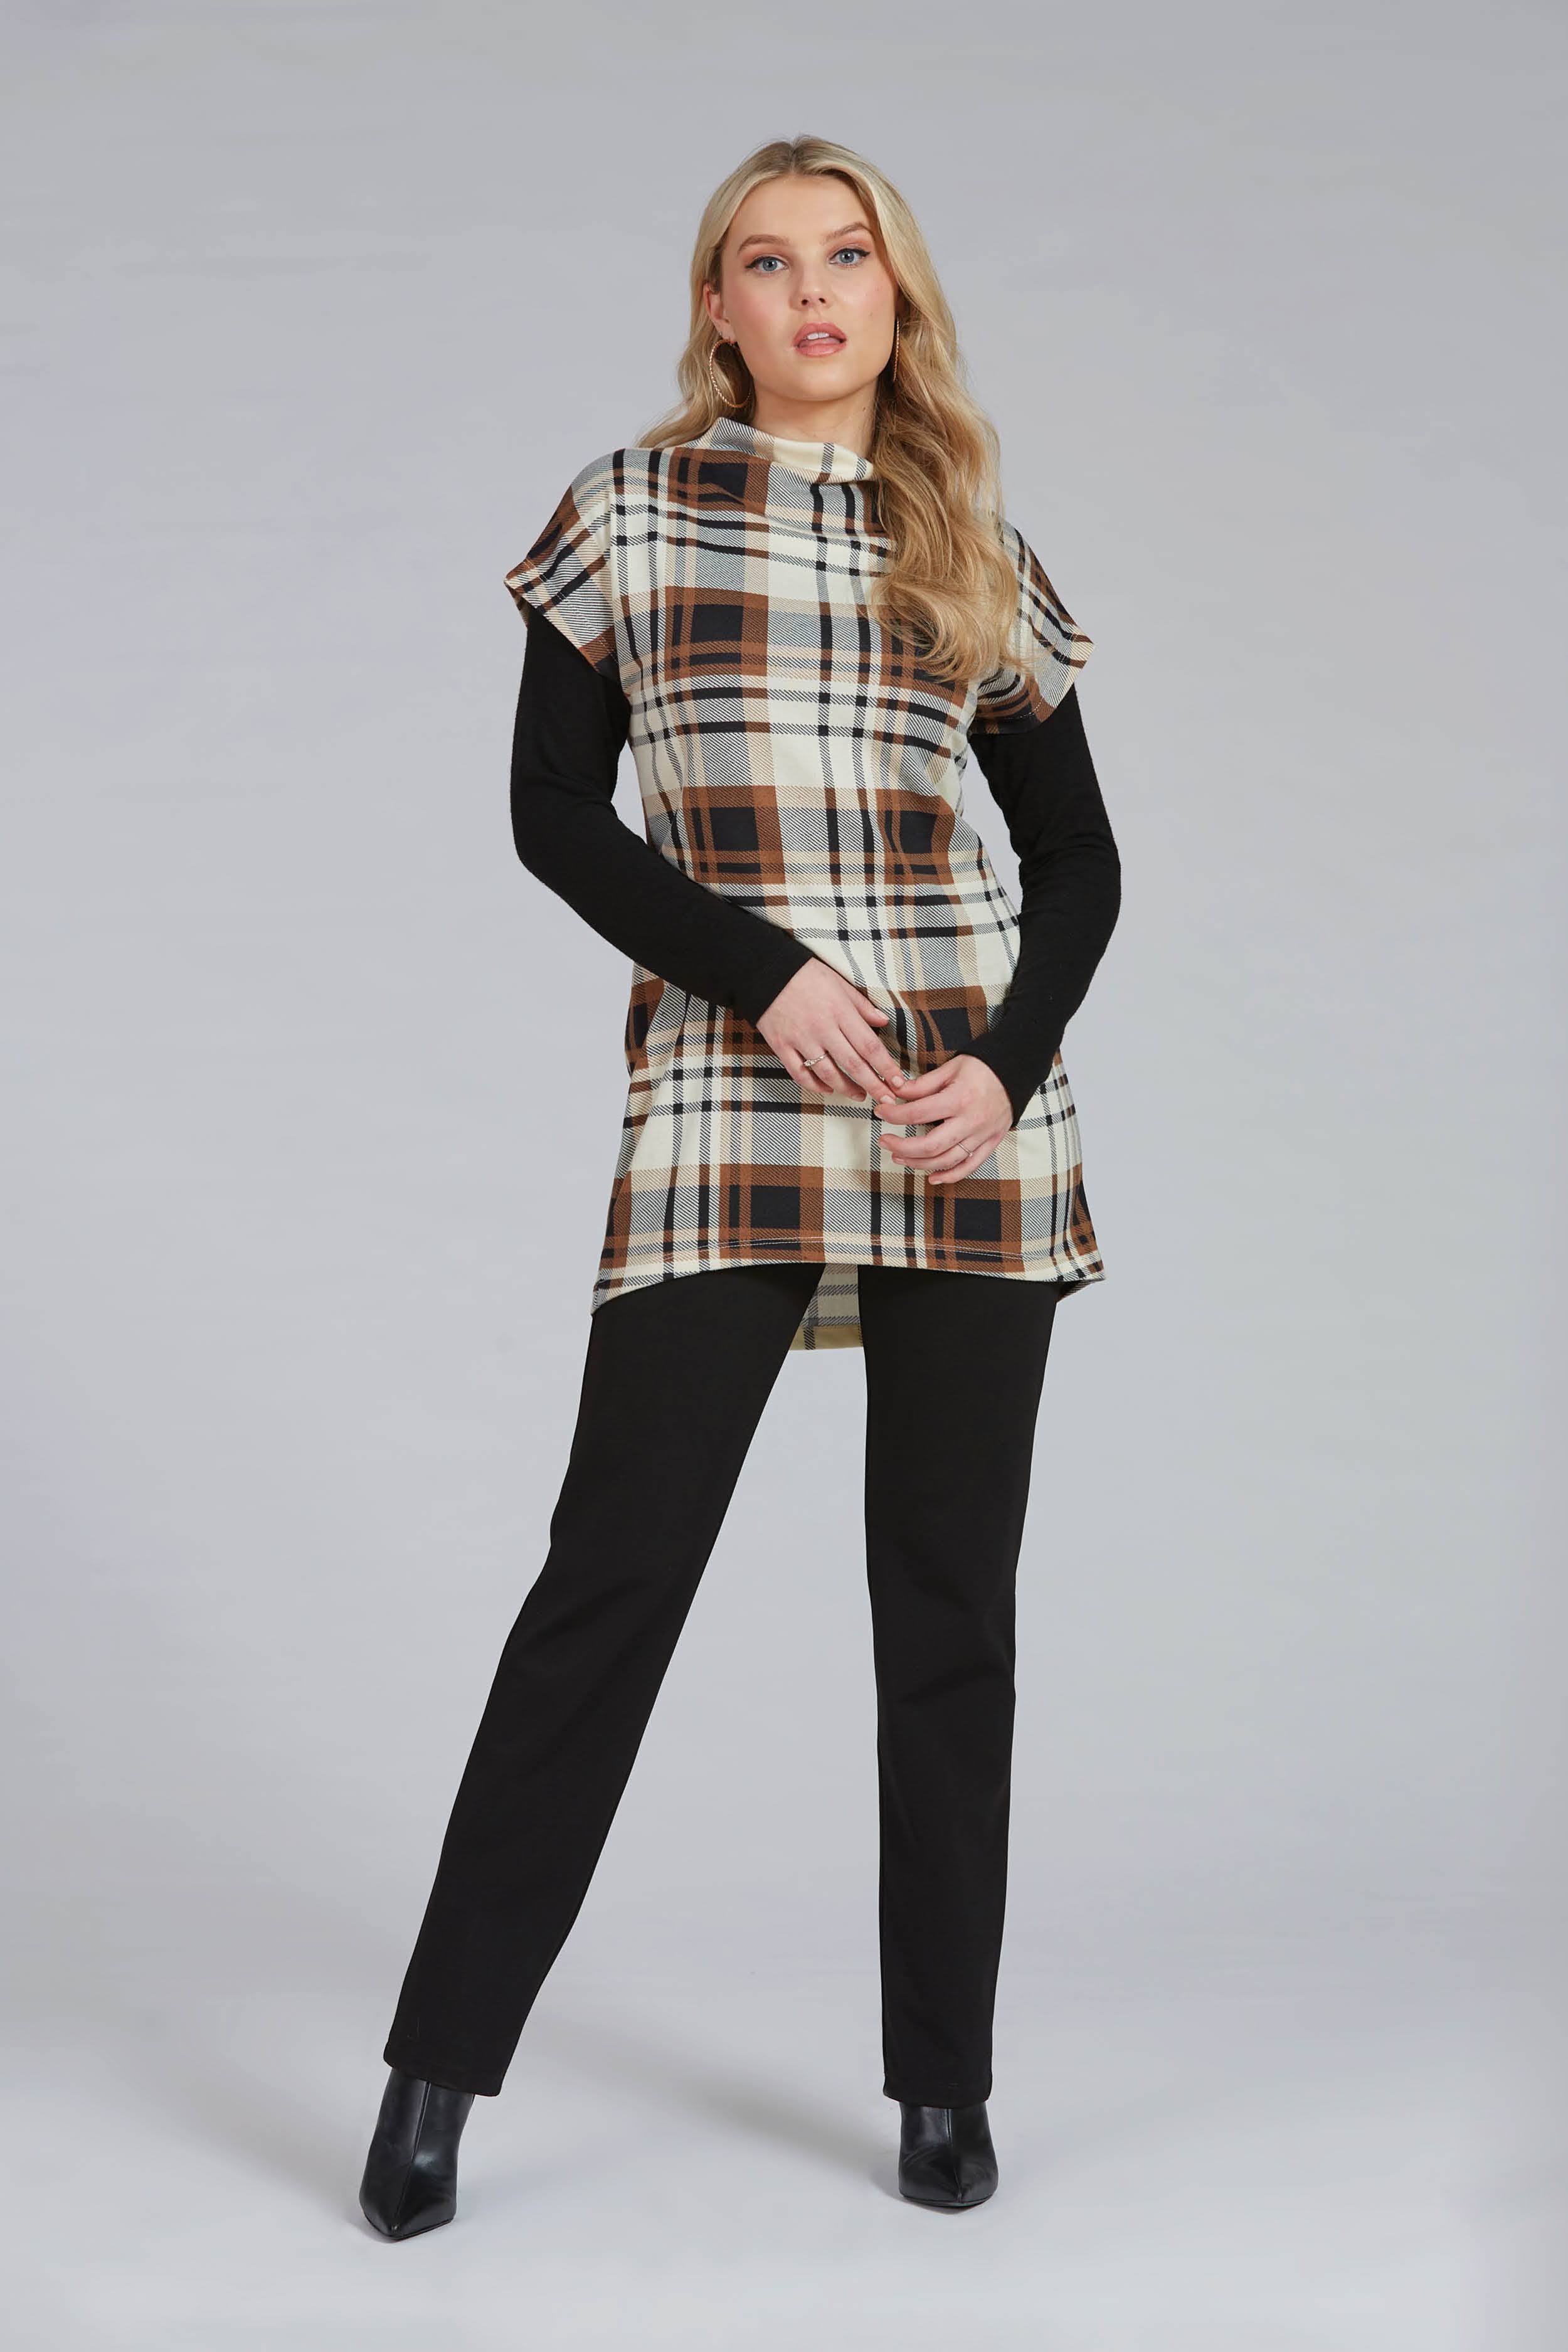 Izel Mock Tunic, Cream and Brown Plaid, double-layer,  small cowl neck, short extended sleeves, hi-low hemline, sizes 4-16, made in Canada